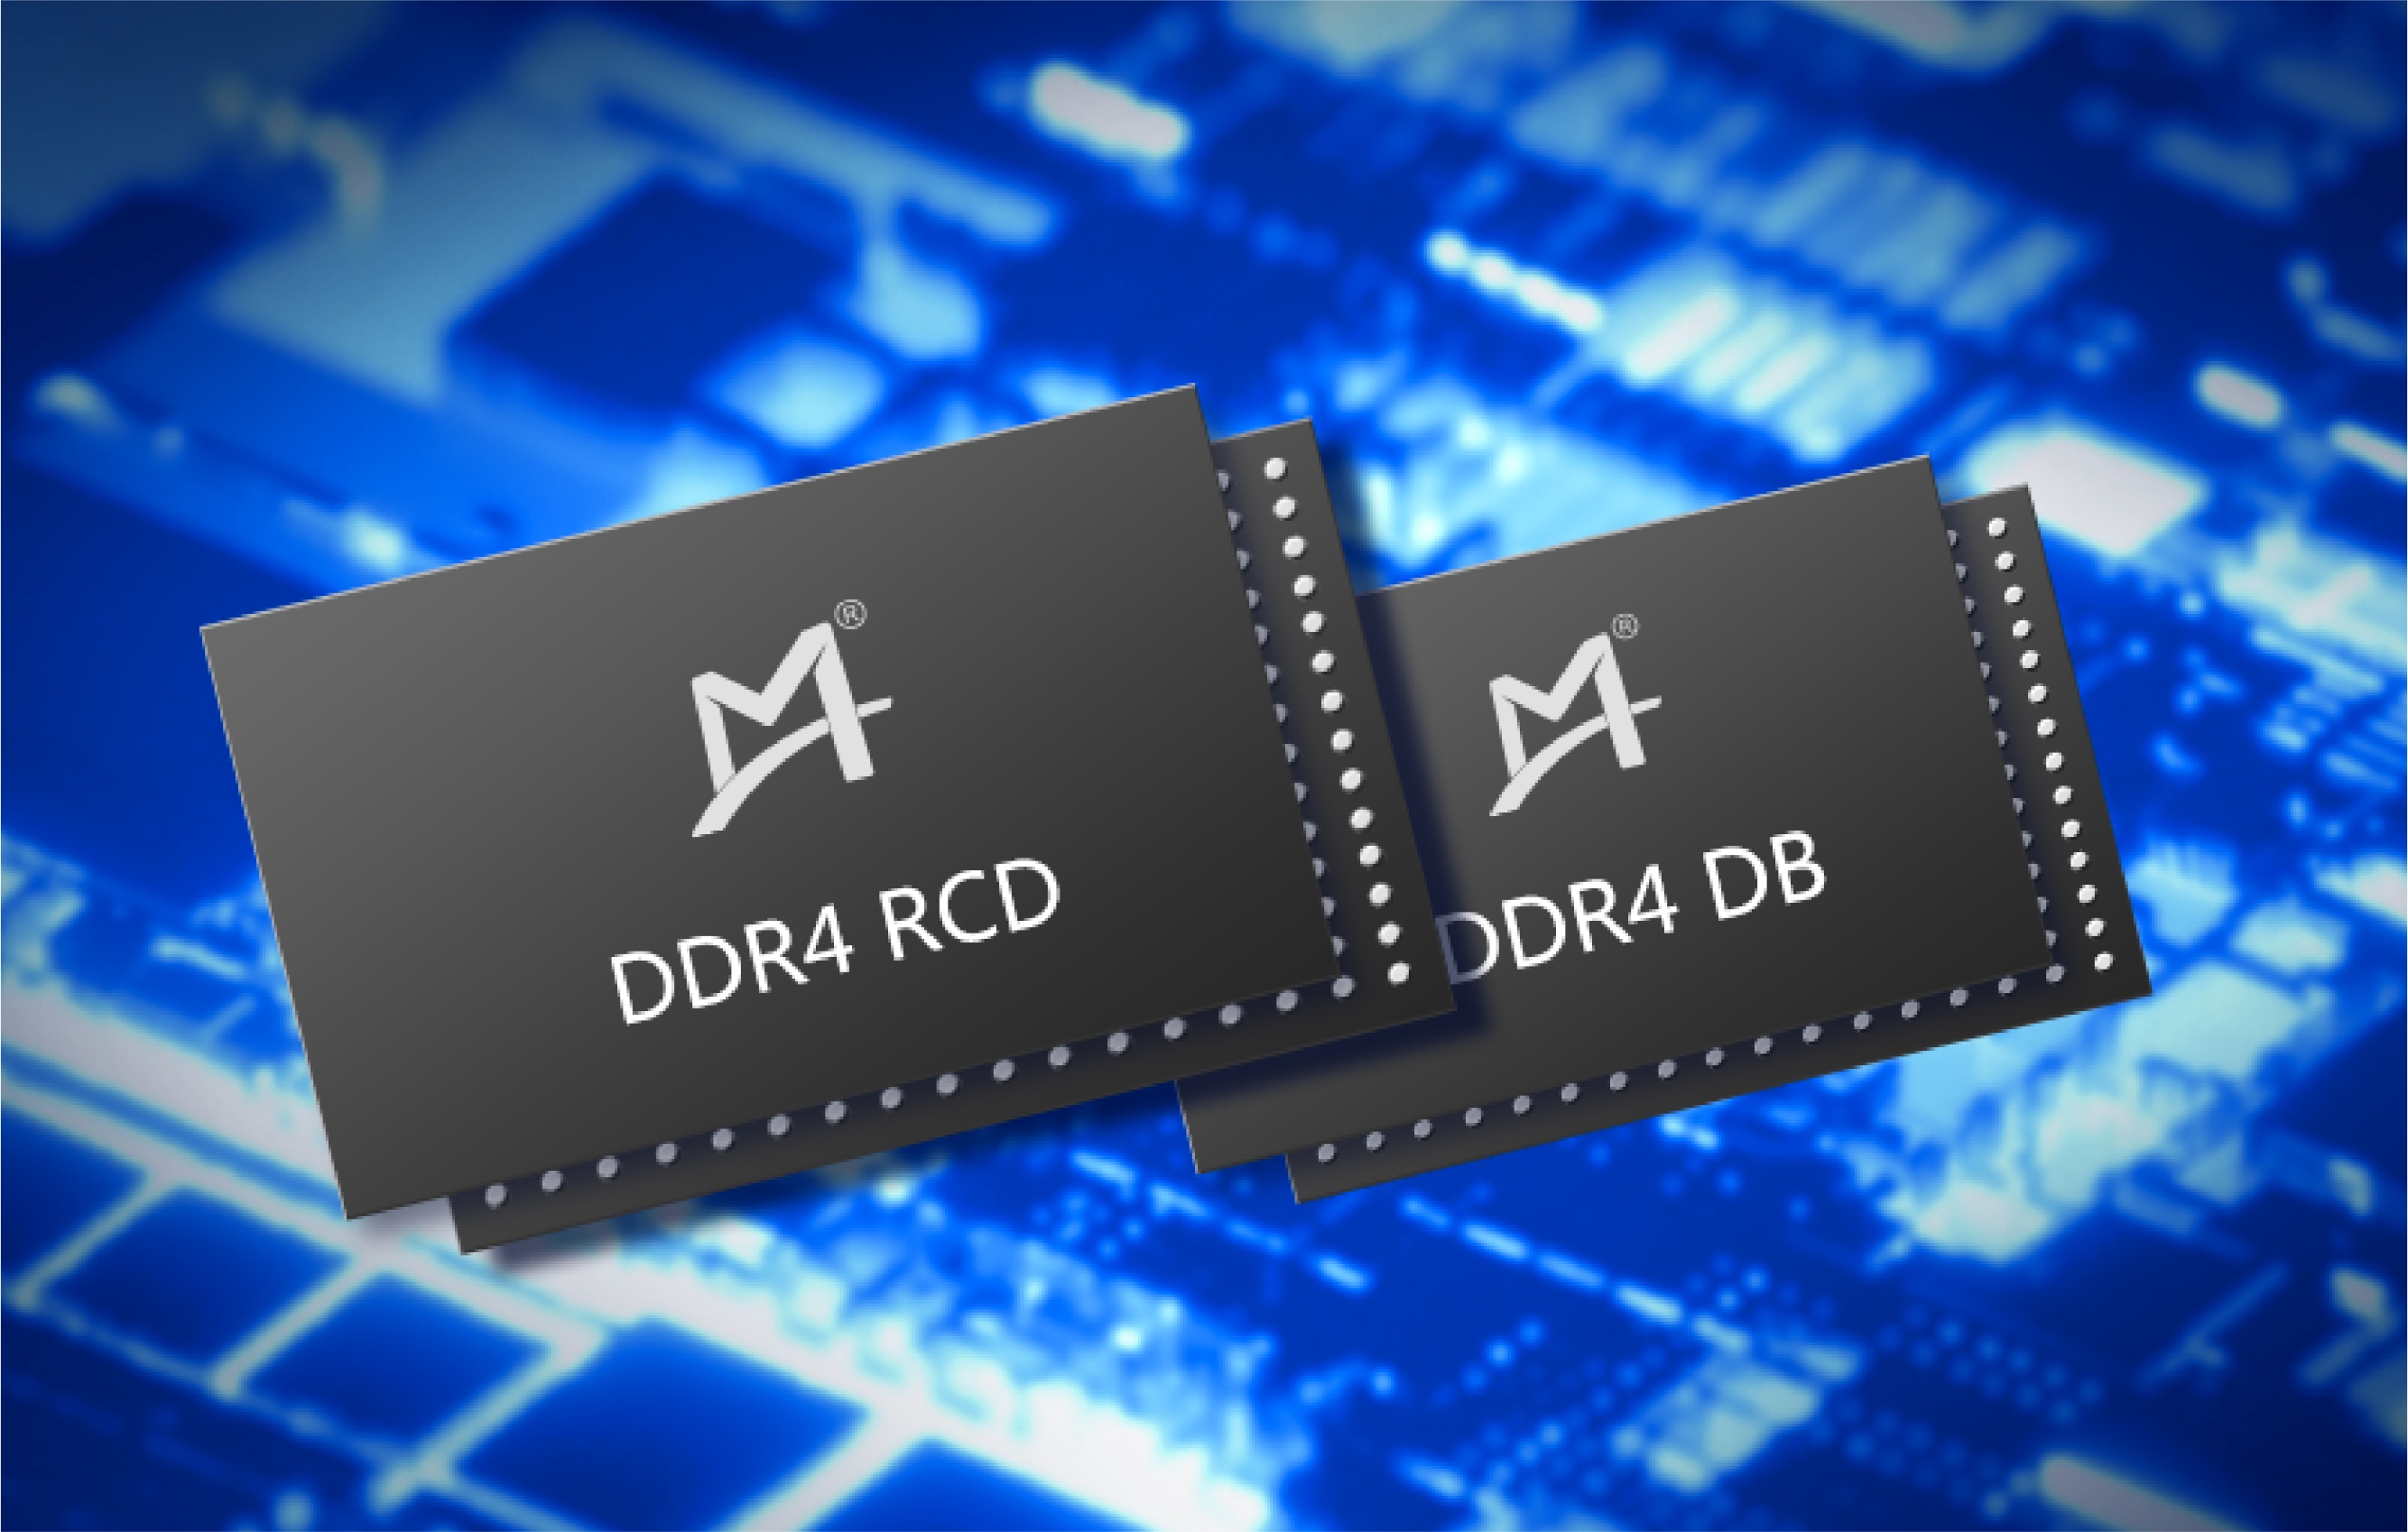 DDR4 RCD and DB